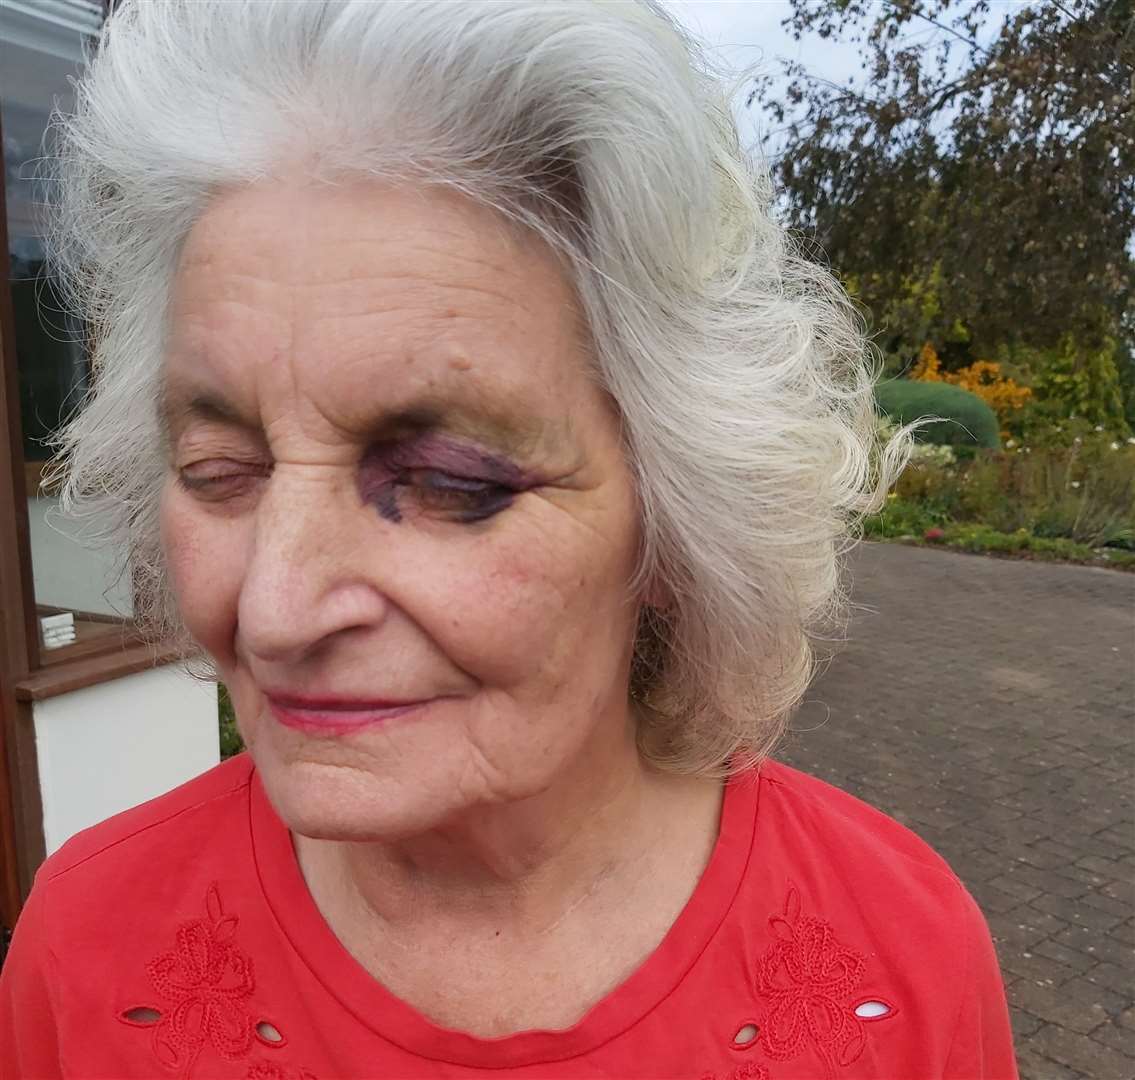 The bruise on Joan Stone's face, where was she struck with a gun